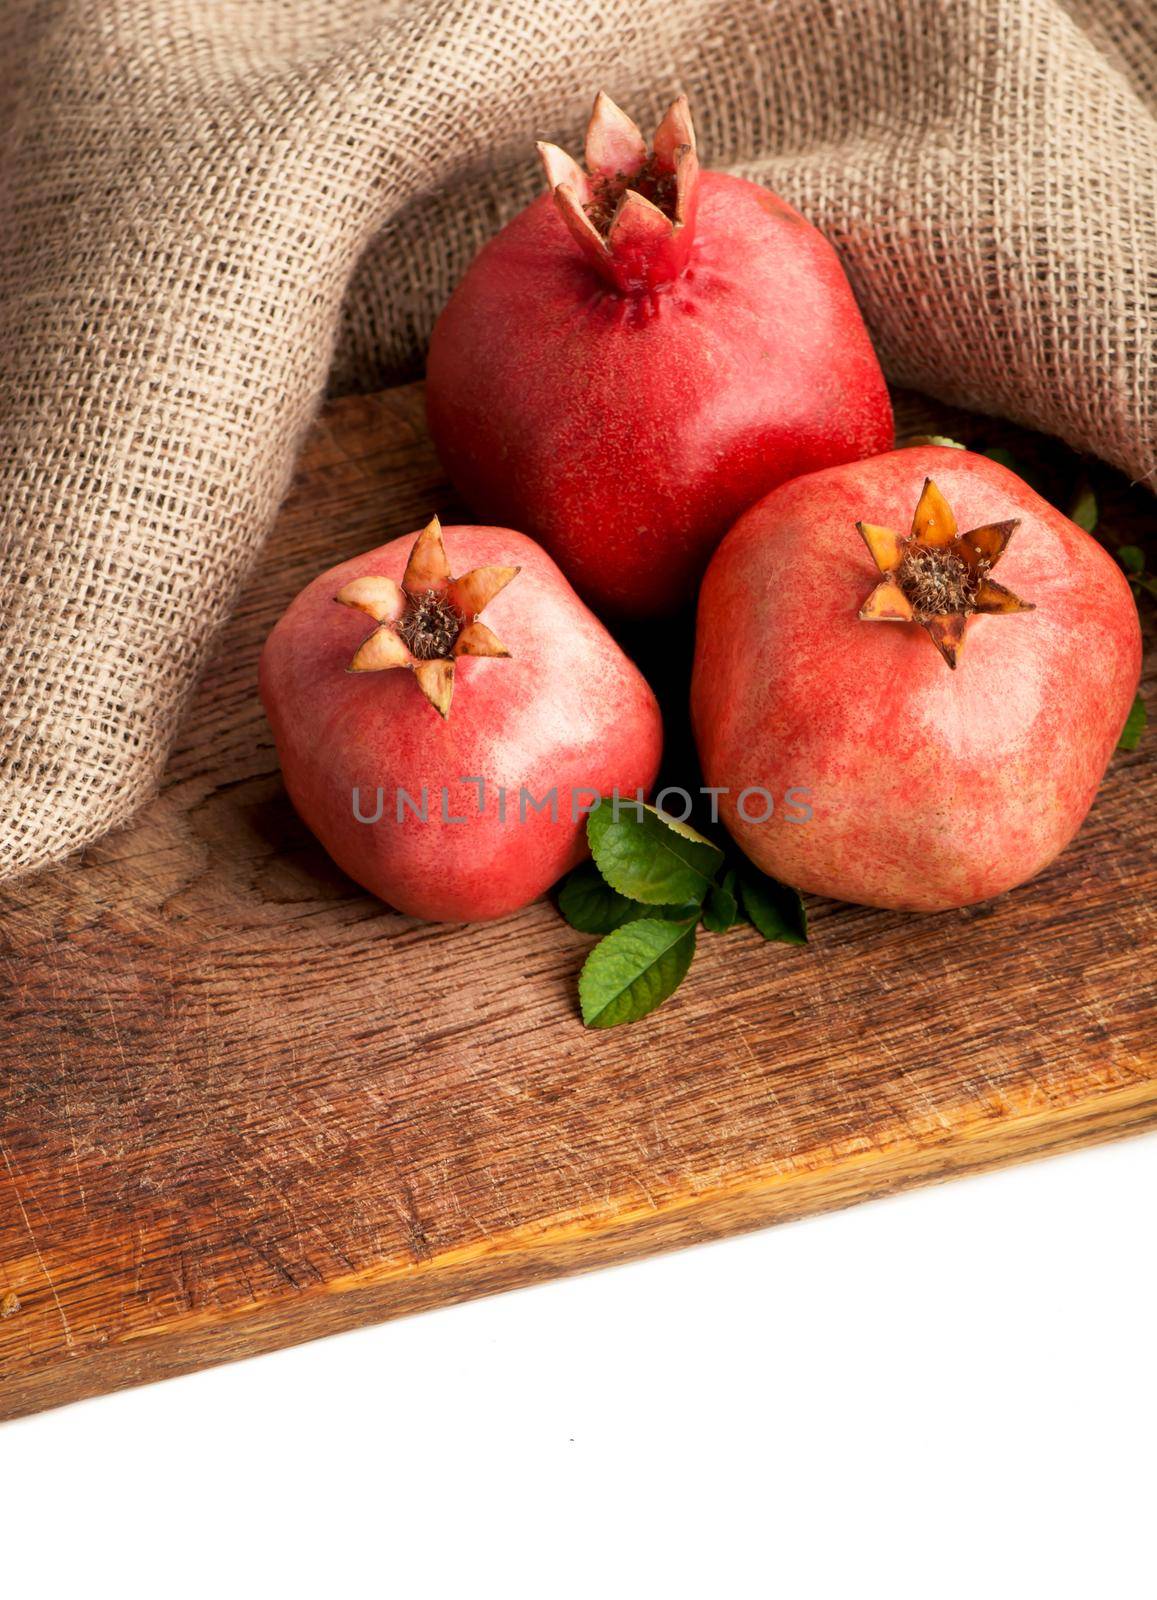 ripe pomegranate with leaves on a wooden board by aprilphoto